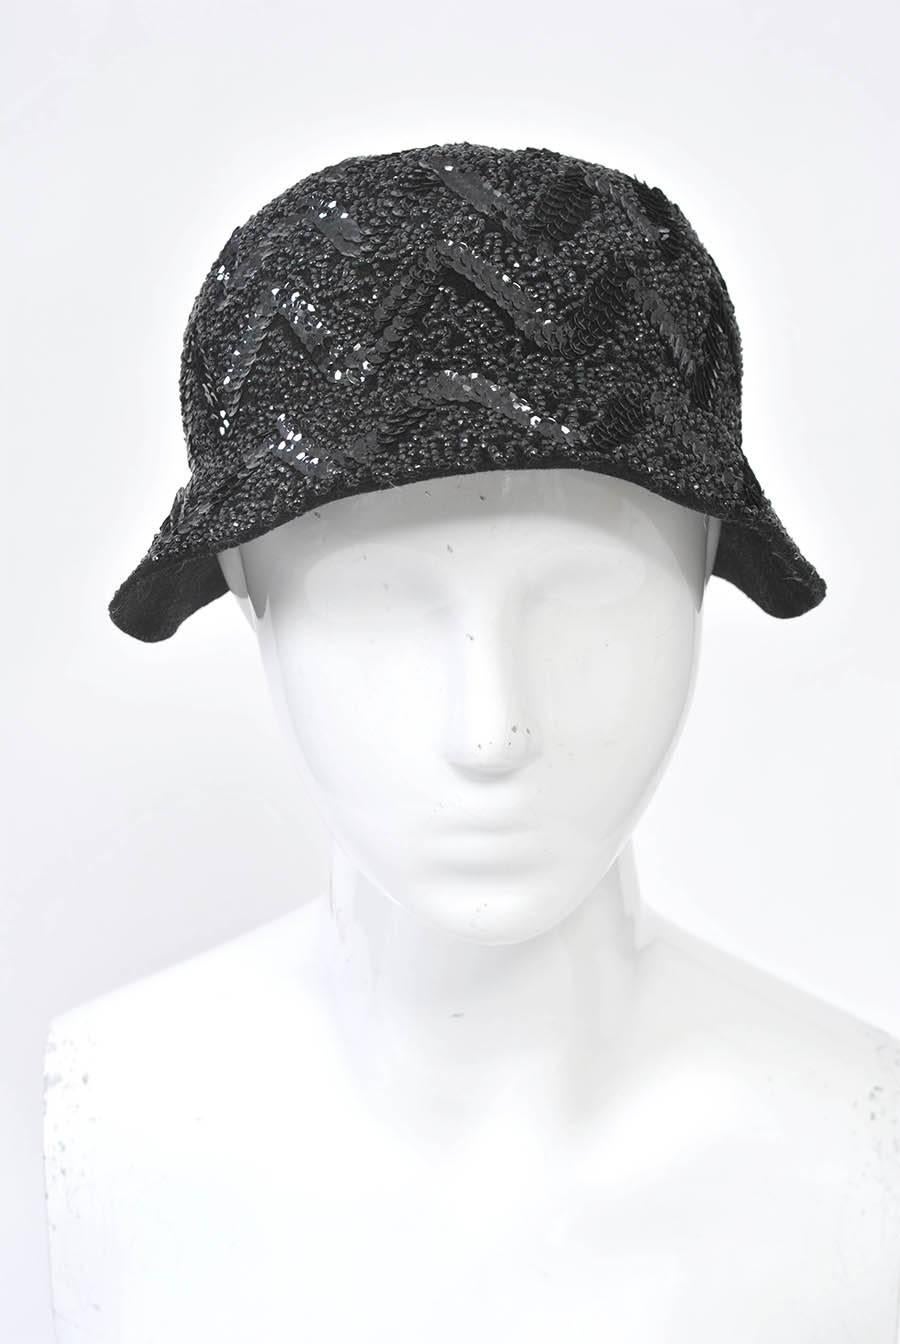 Bonwit Teller Black Beaded Hat In Excellent Condition For Sale In Alford, MA